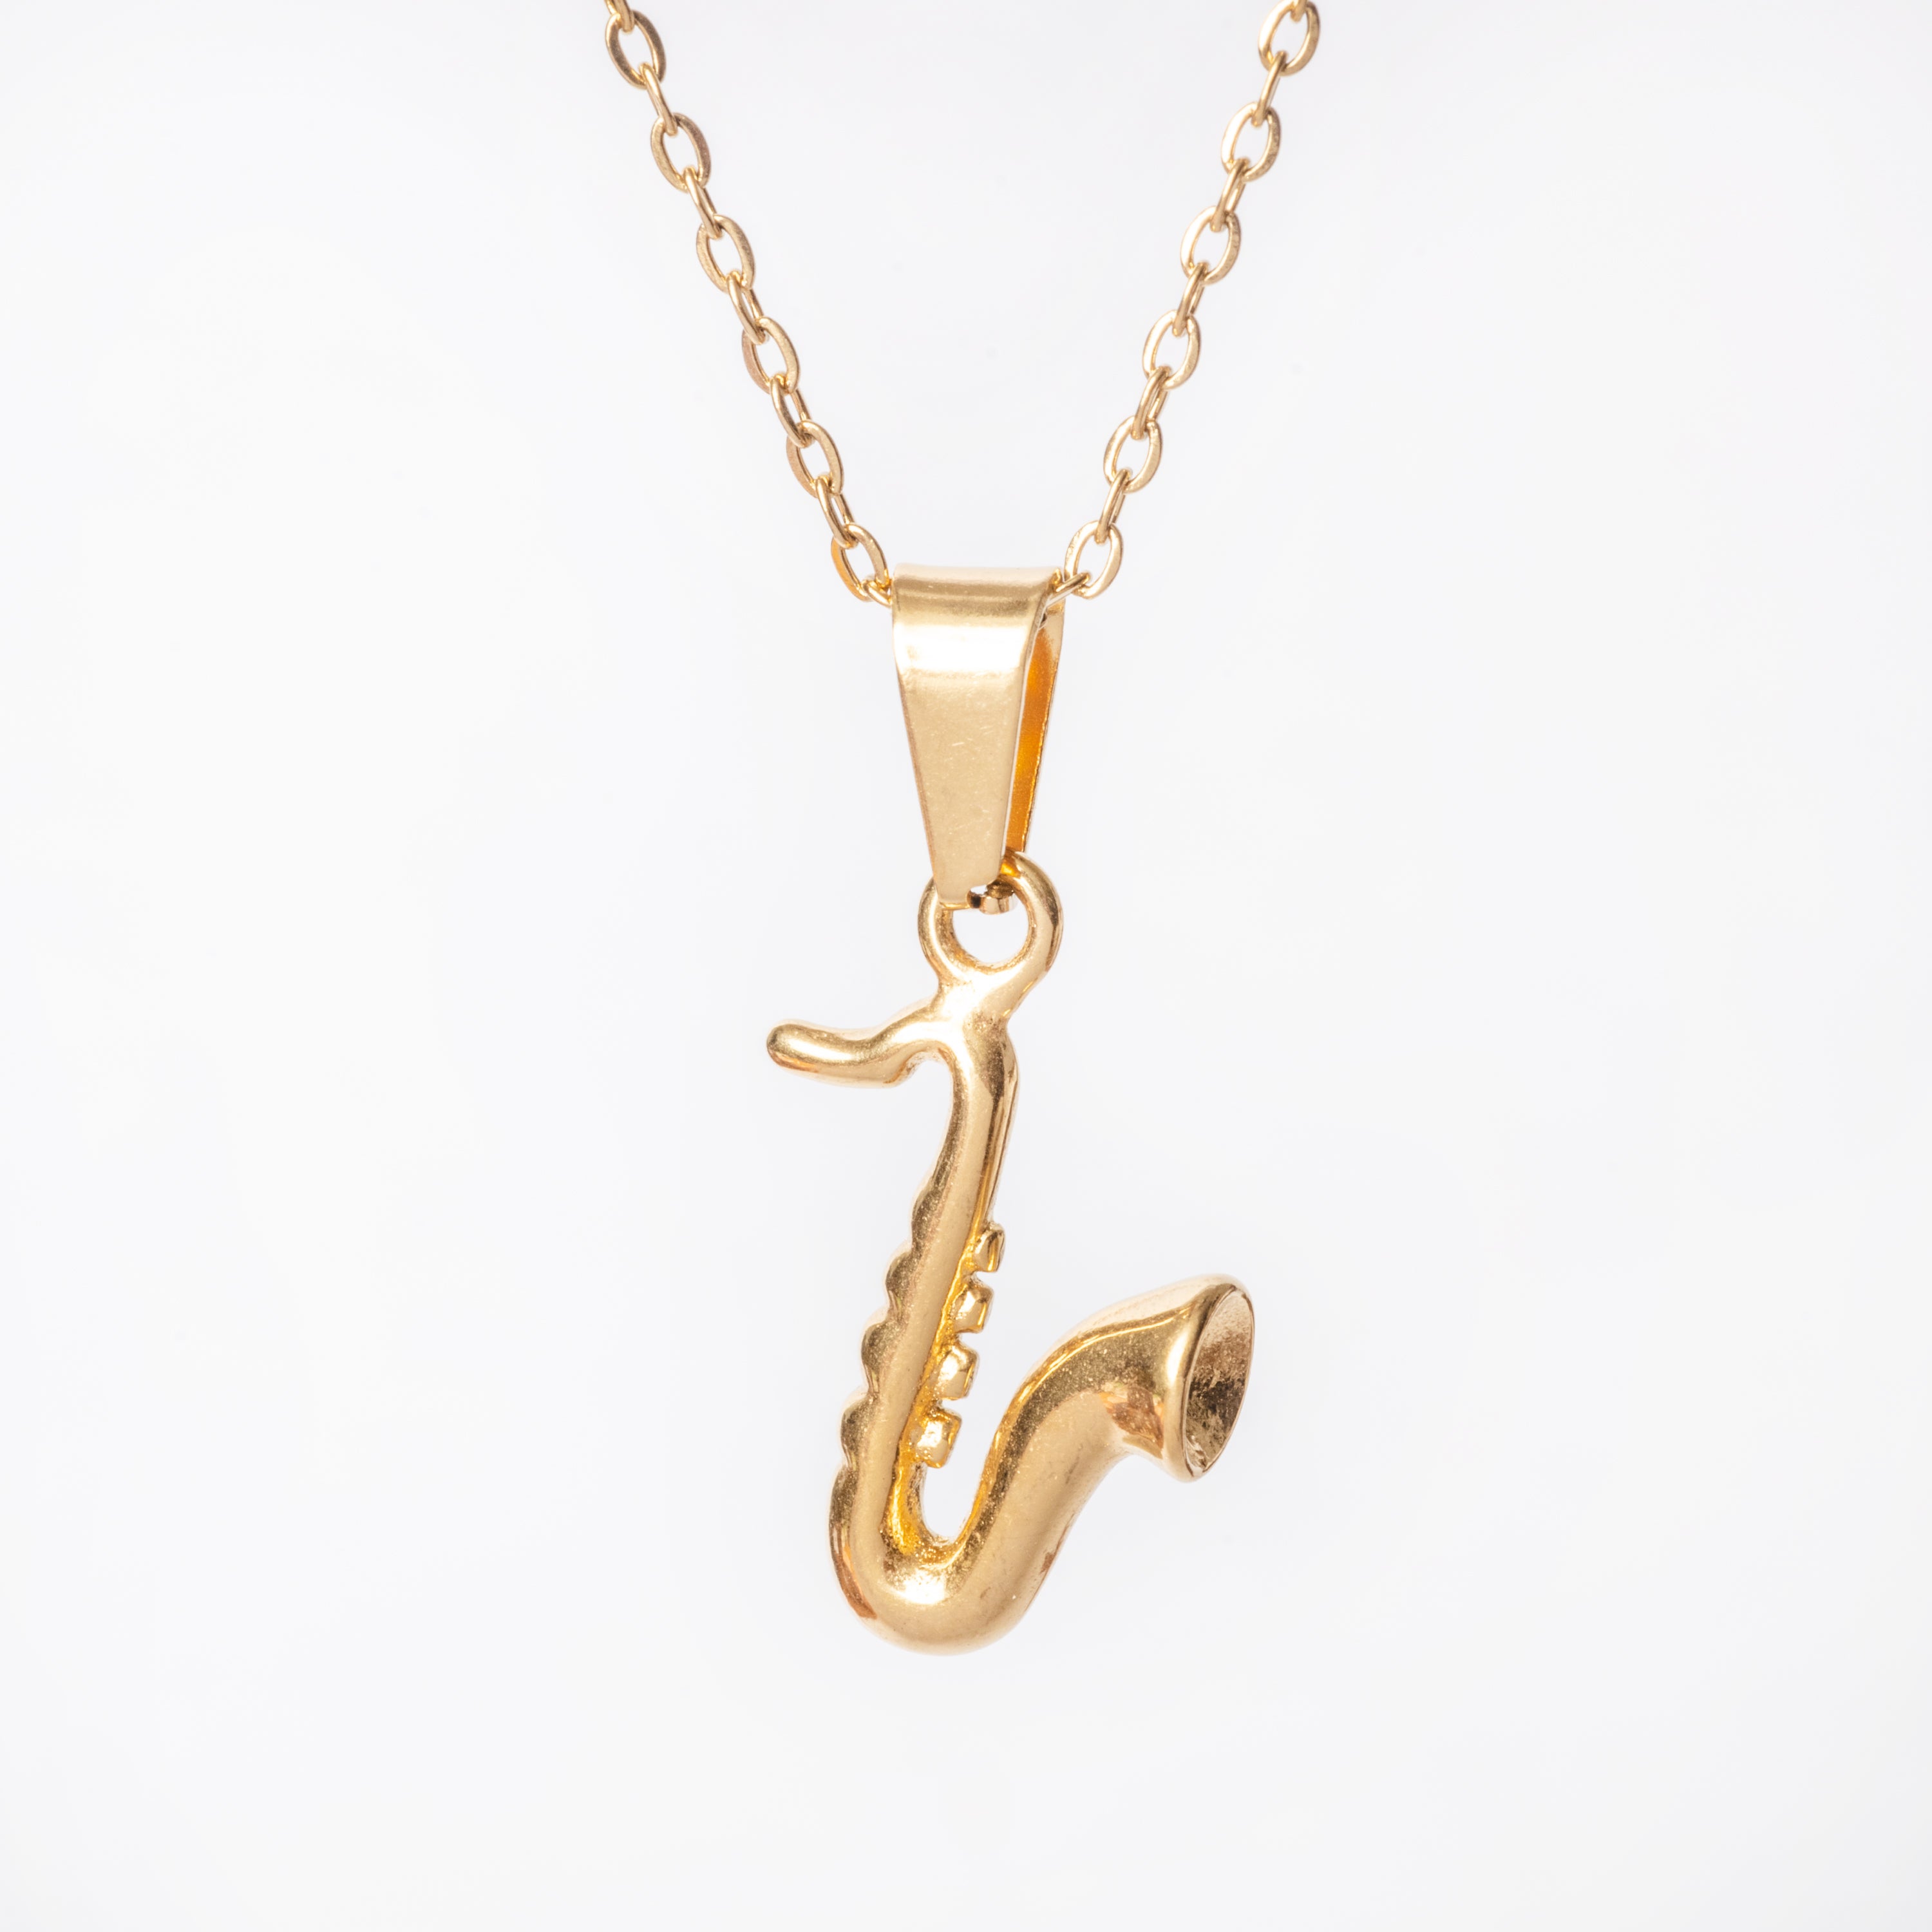 The Musician Necklace